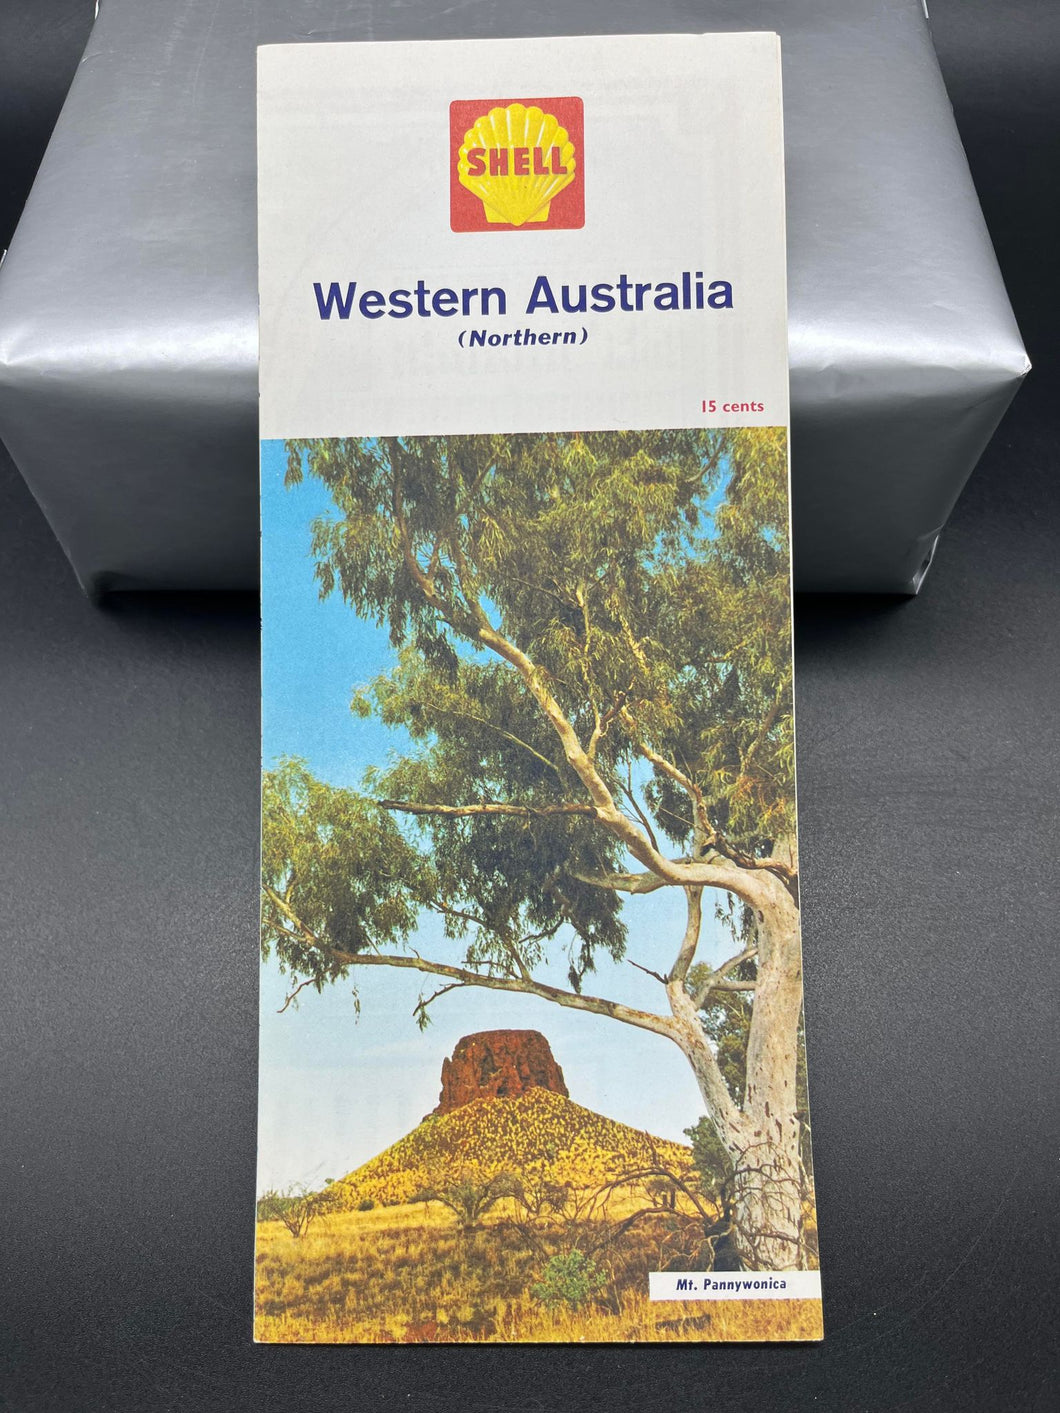 Shell Touring Guide - Western Australia (Northern)